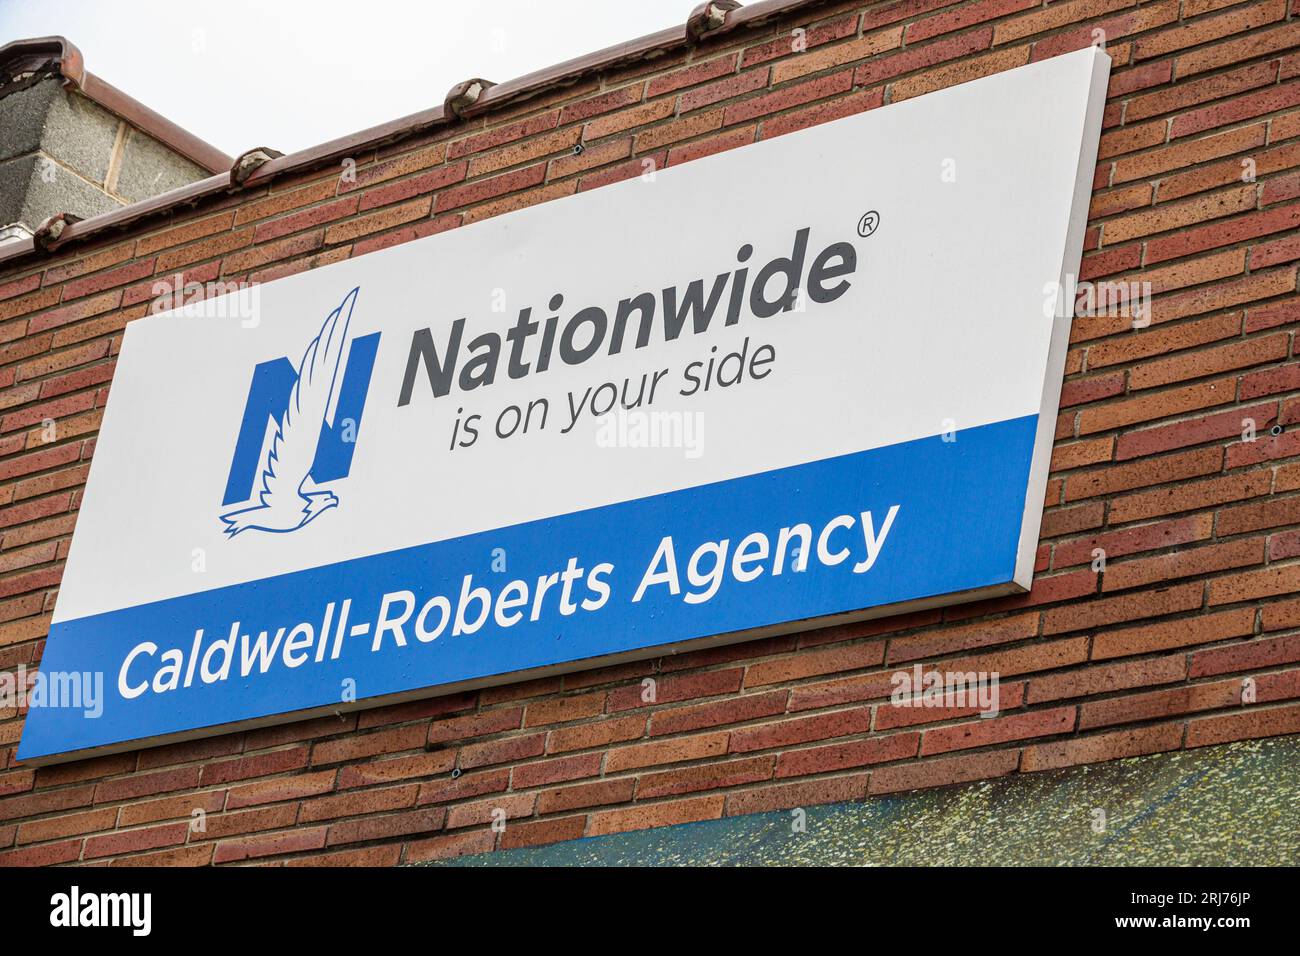 Gastonia North Carolina,Nationwide insurance services agency,outside exterior,building front entrance,sign information,promoting promotion,advertising Stock Photo